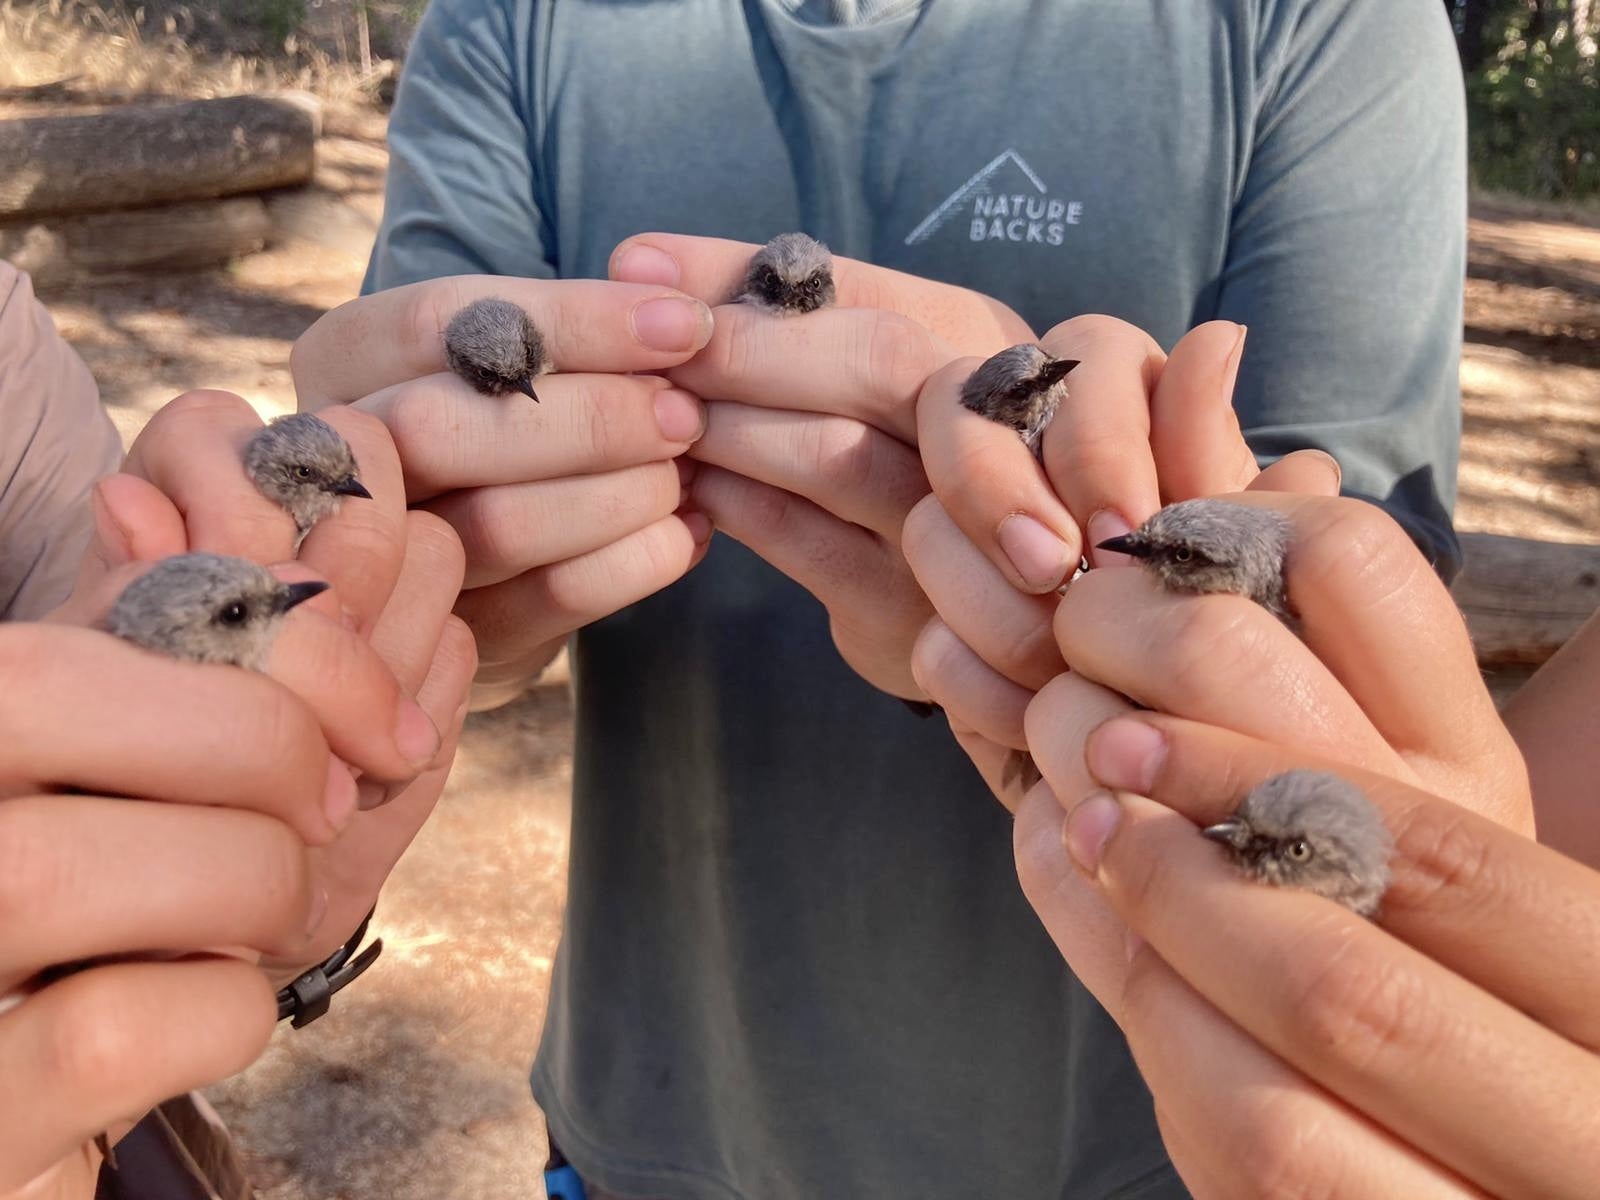 three biologists' hands, each holding a small gray birds